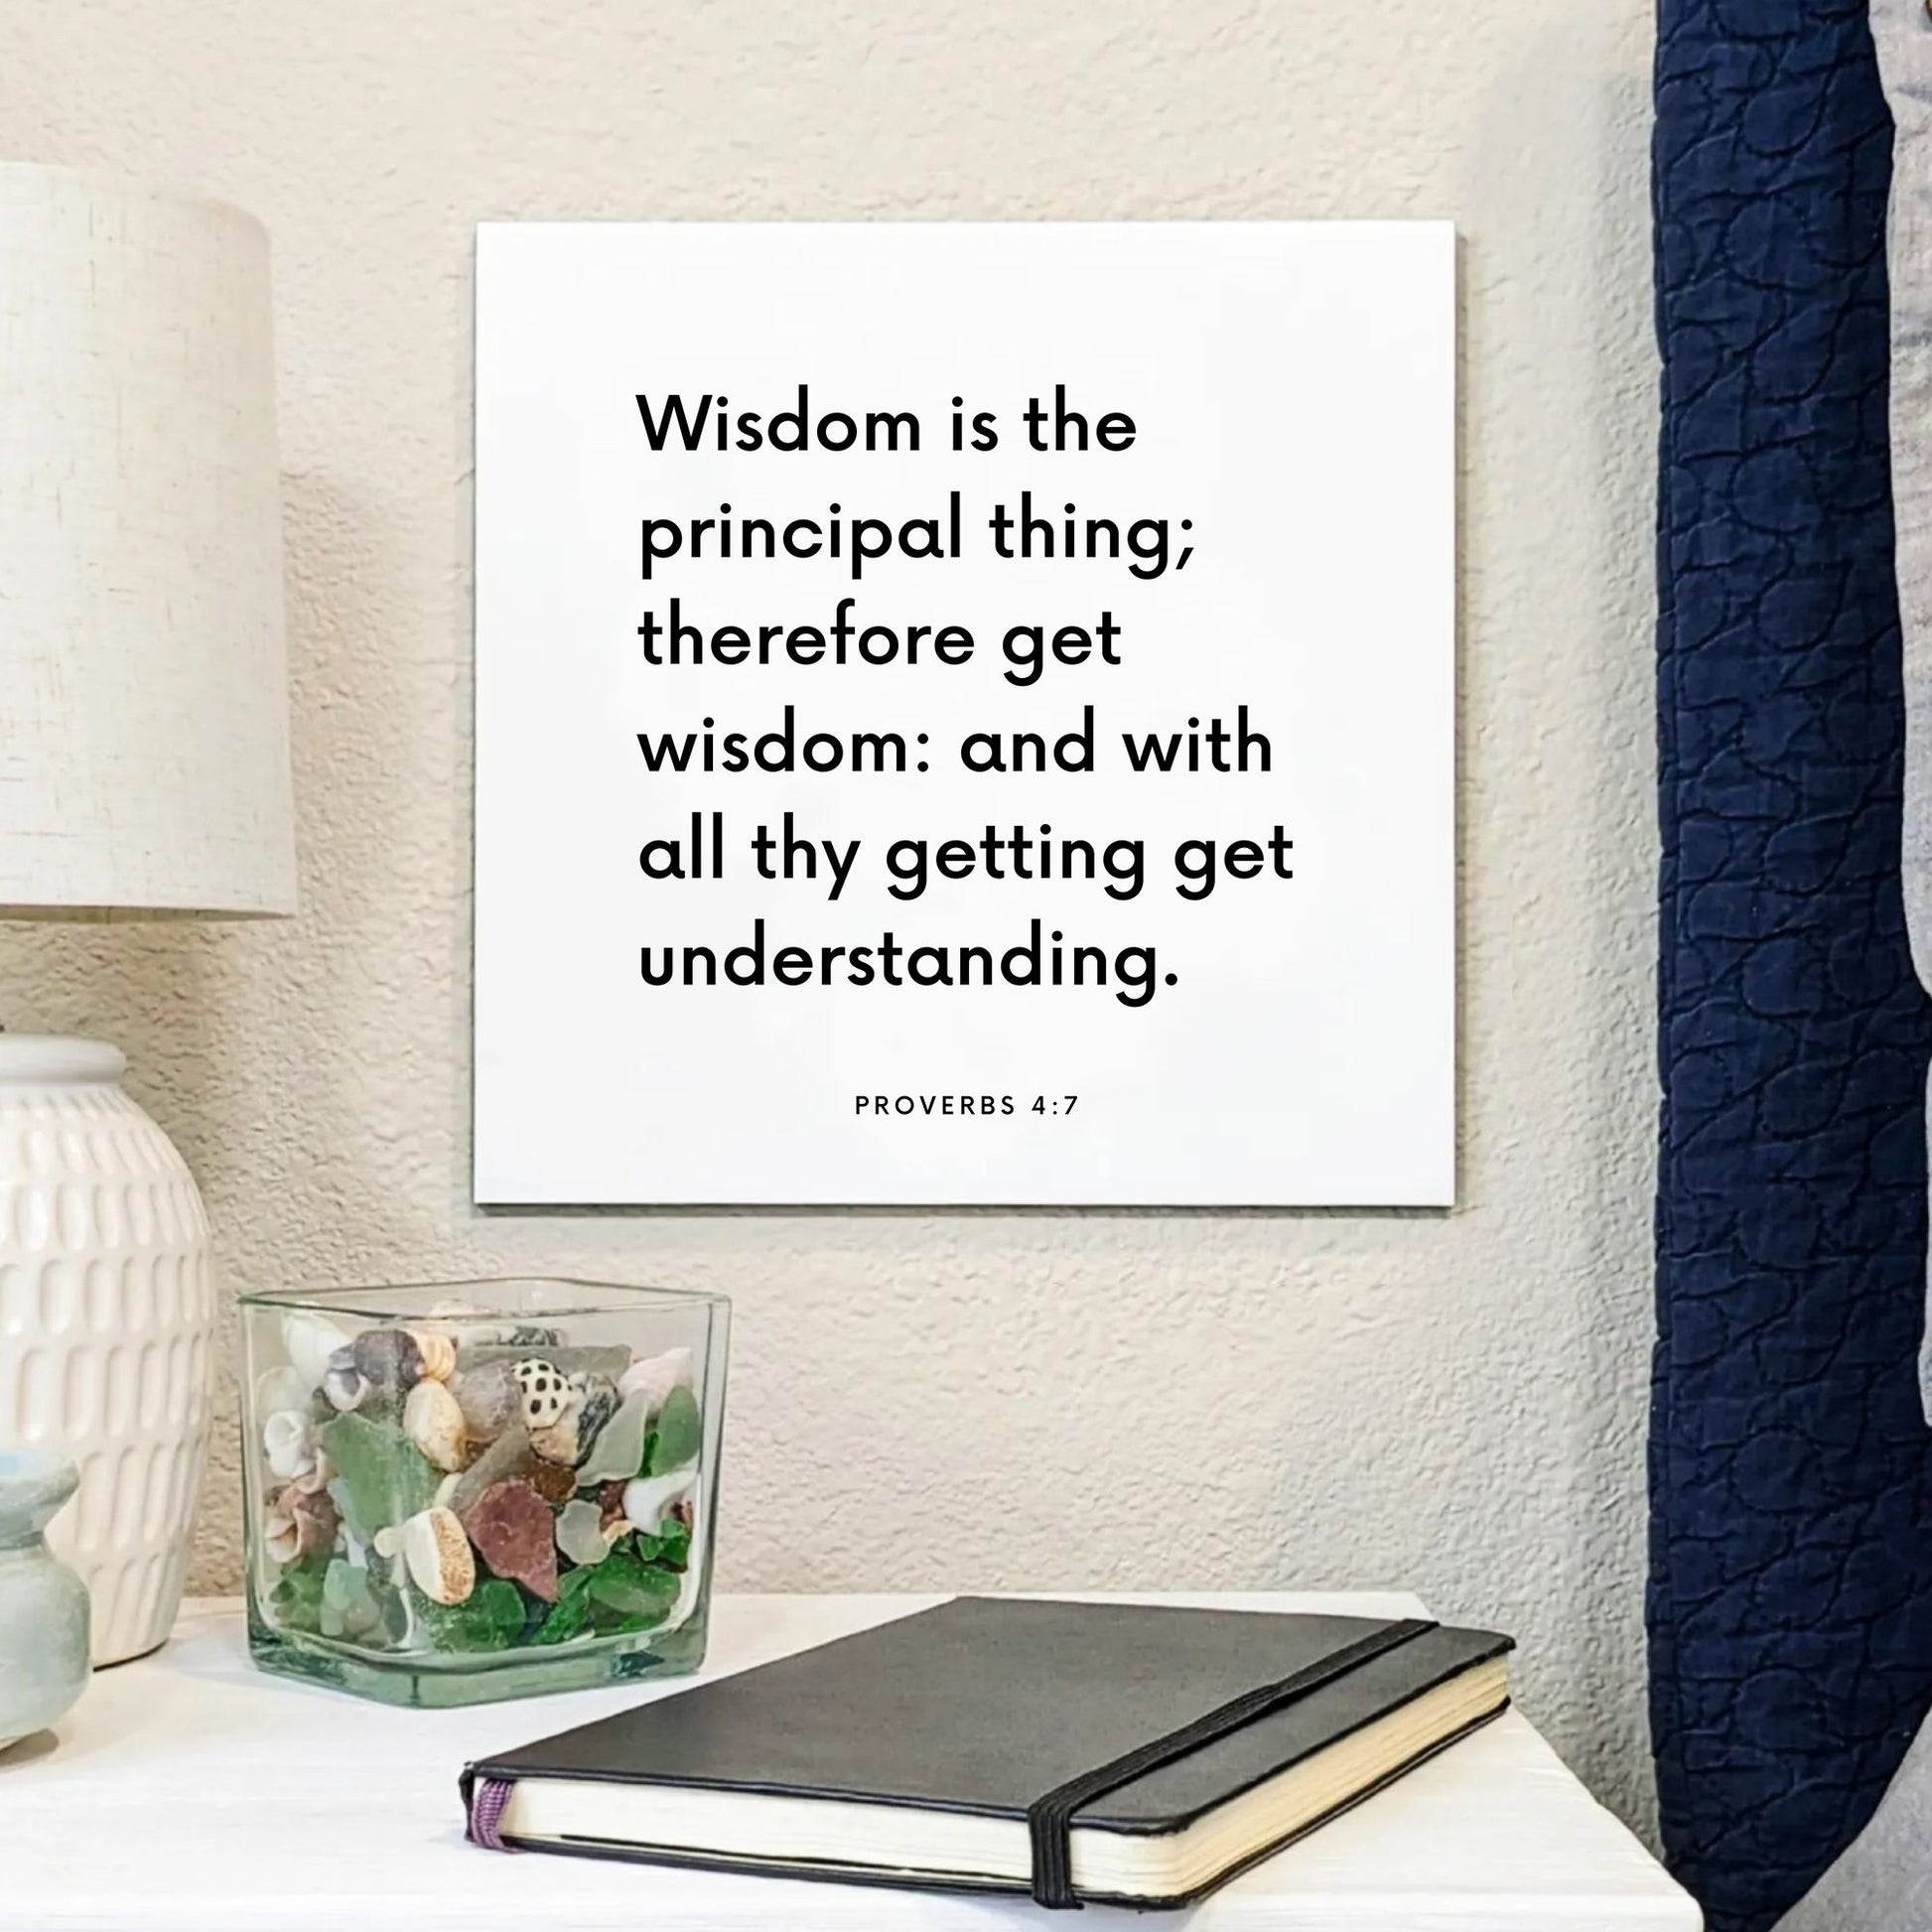 Bedside mouting of the scripture tile for Proverbs 4:7 - "Wisdom is the principal thing; therefore get wisdom"